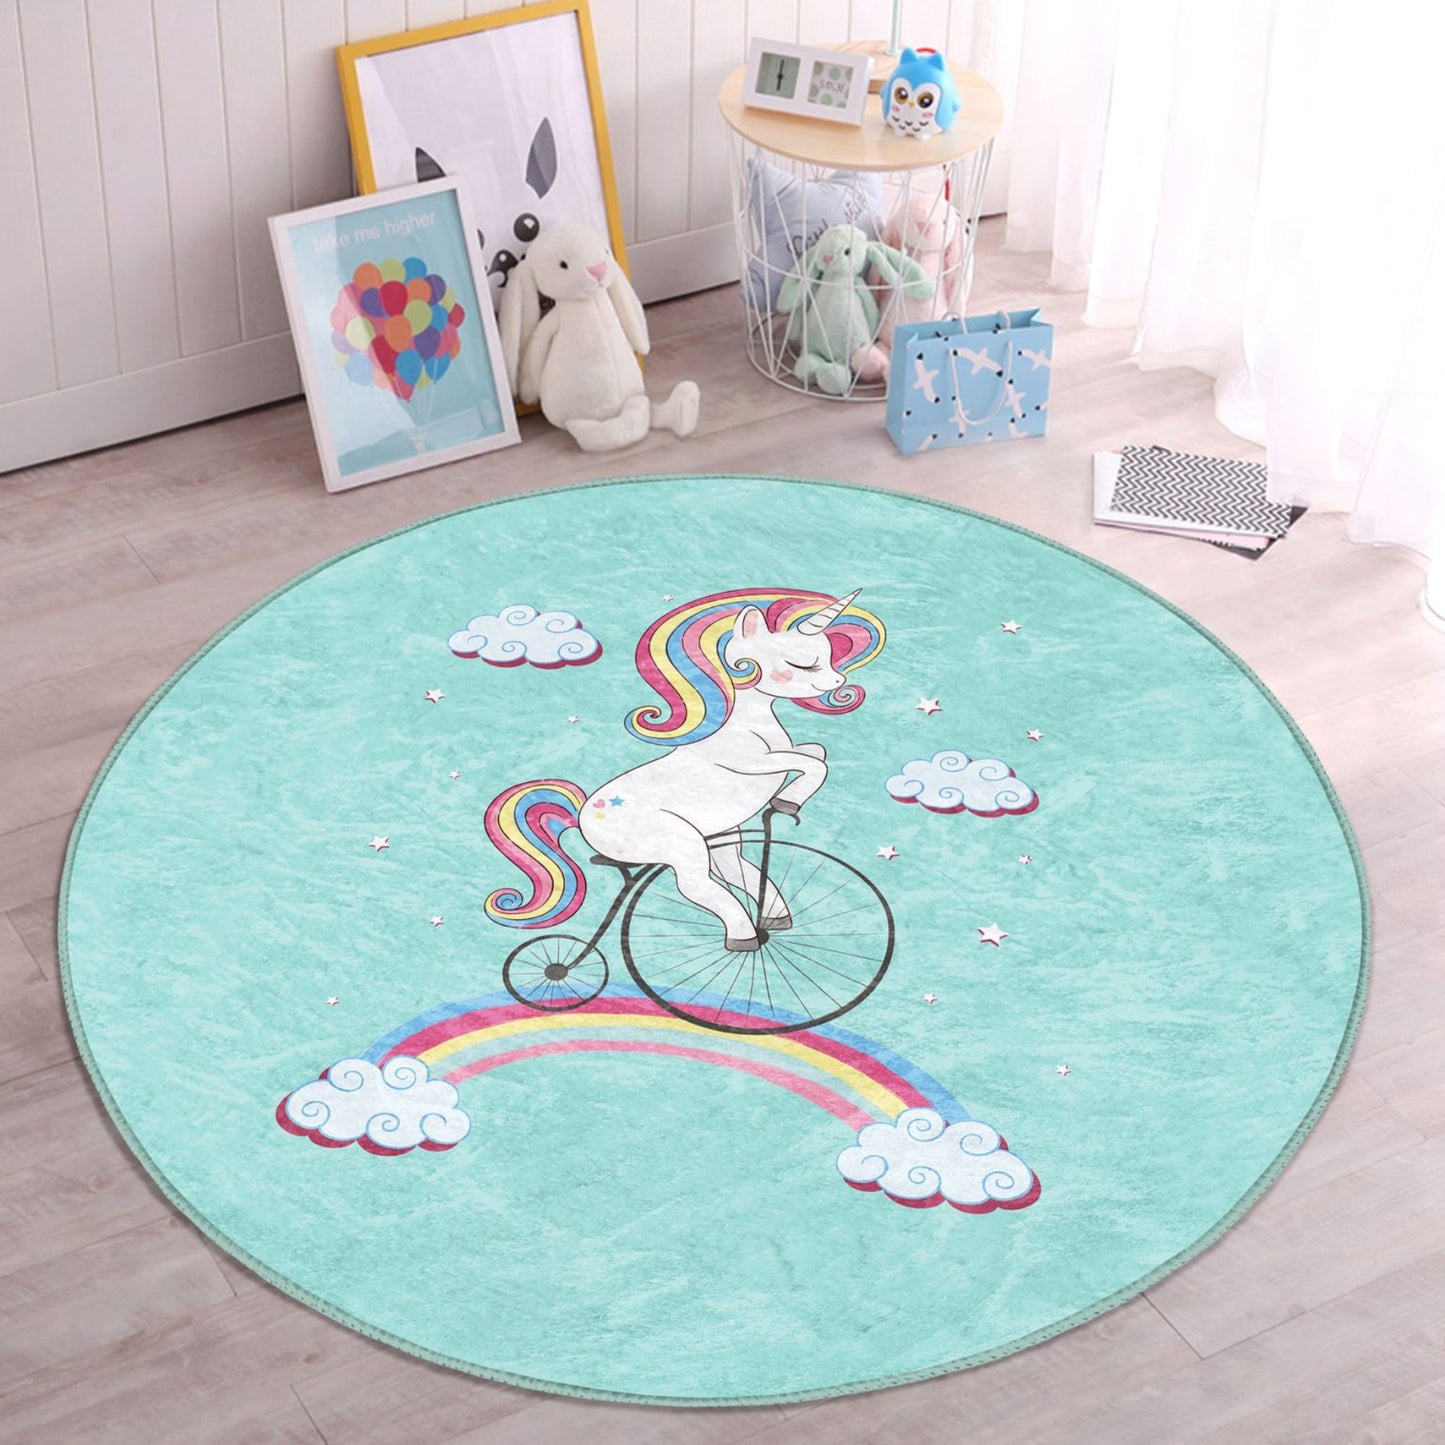 Homeezone's Unicorn Riding a Bicycle on the Rainbow Patterned Kids Rug